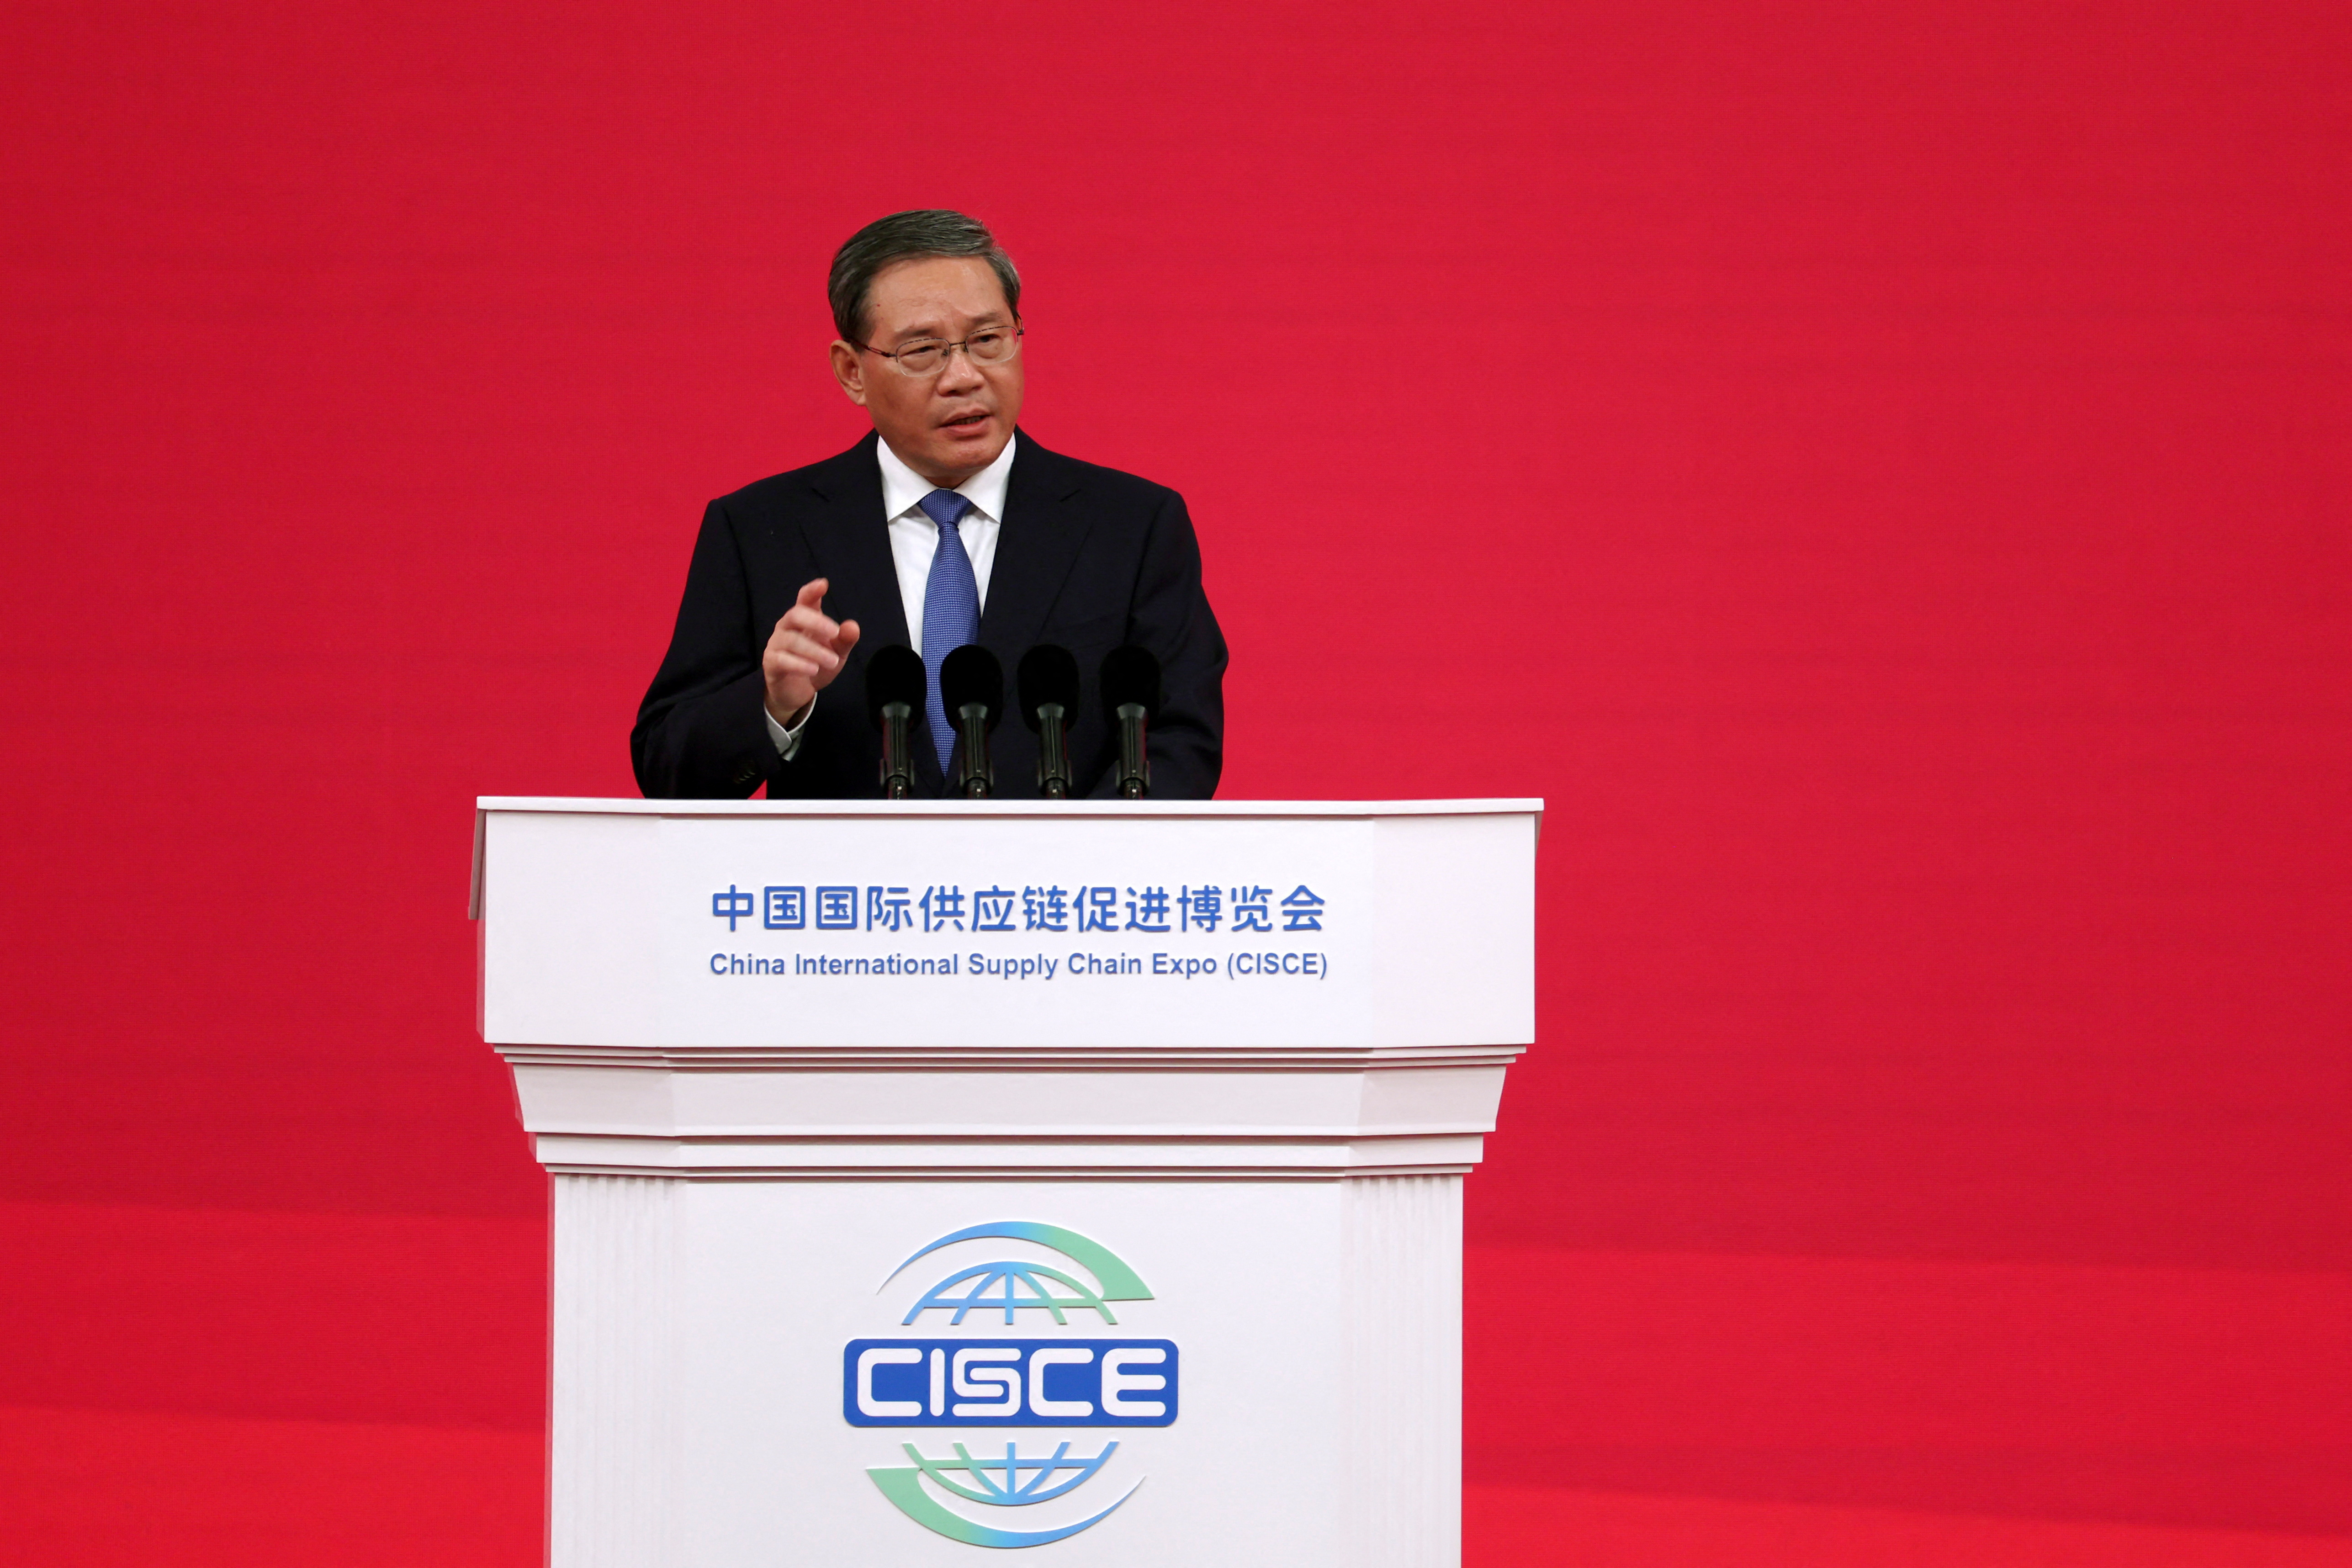 Chinese Premier Li Qiang speaks at the China International Supply Chain Expo in Beijing